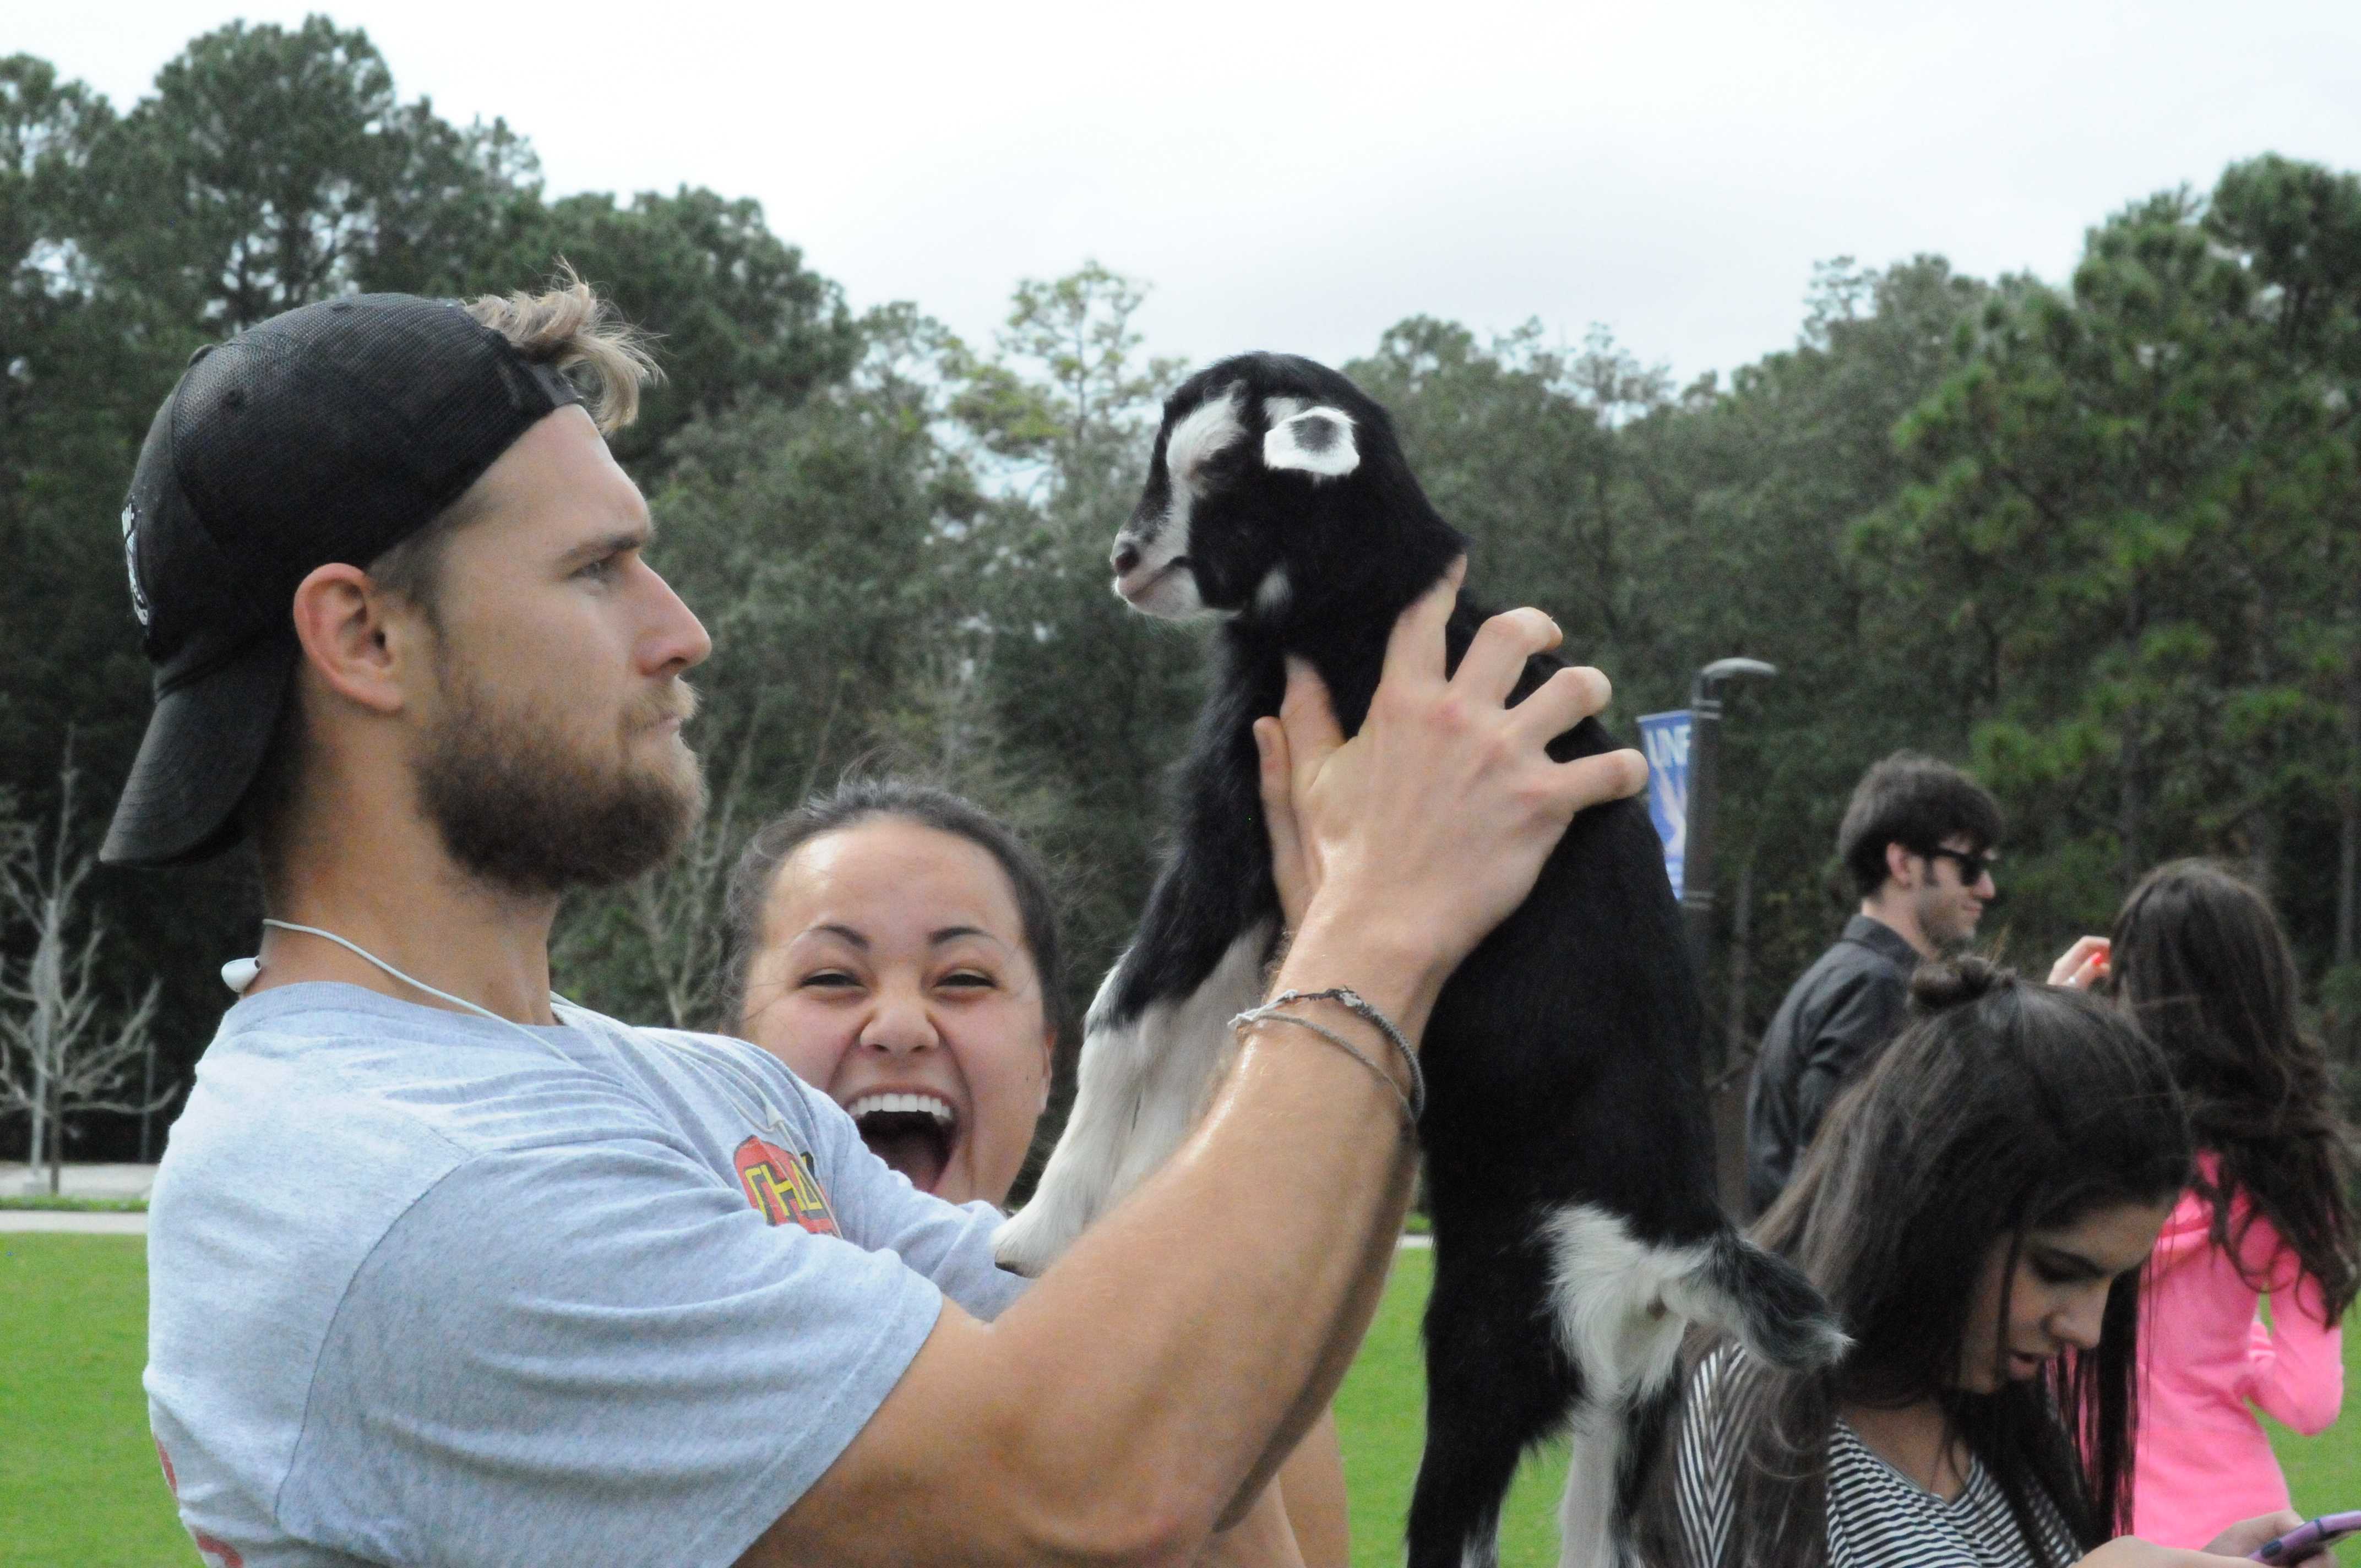 Students could pick up many of the smaller animals. Photo courtesy Osprey Productions